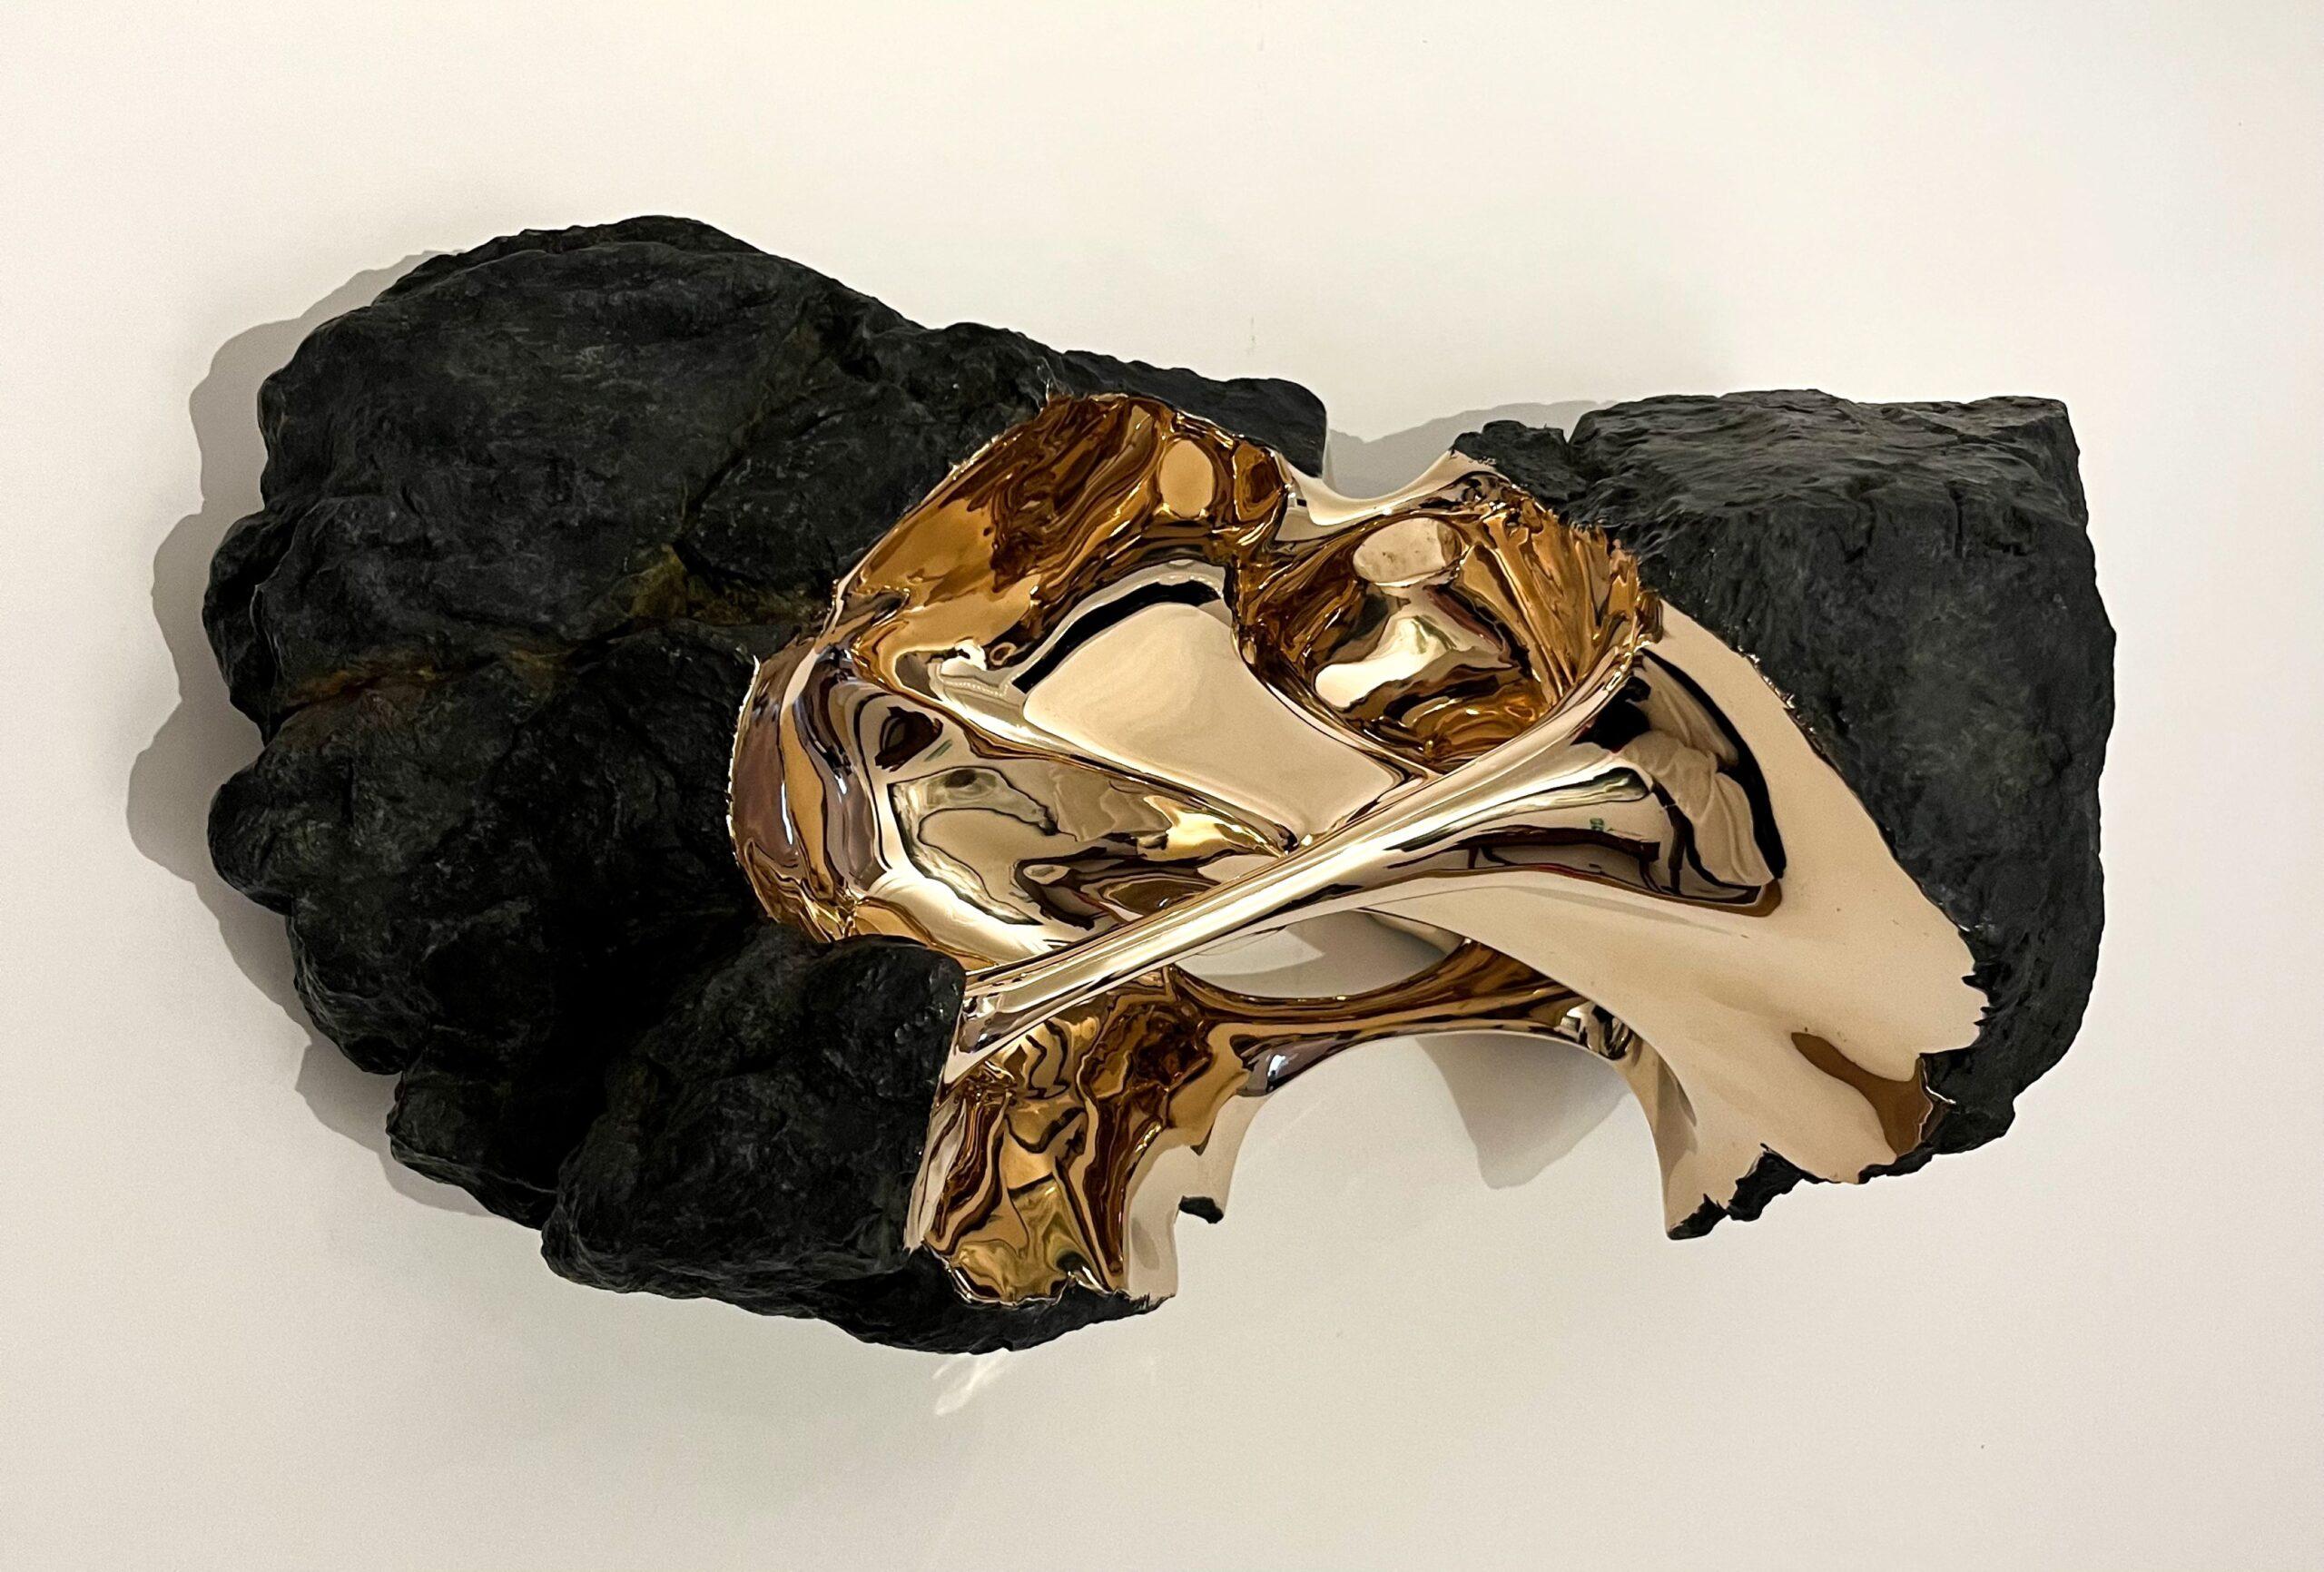 Kairos by Romain Langlois - Rock-like bronze sculpture, golden, abstract For Sale 6